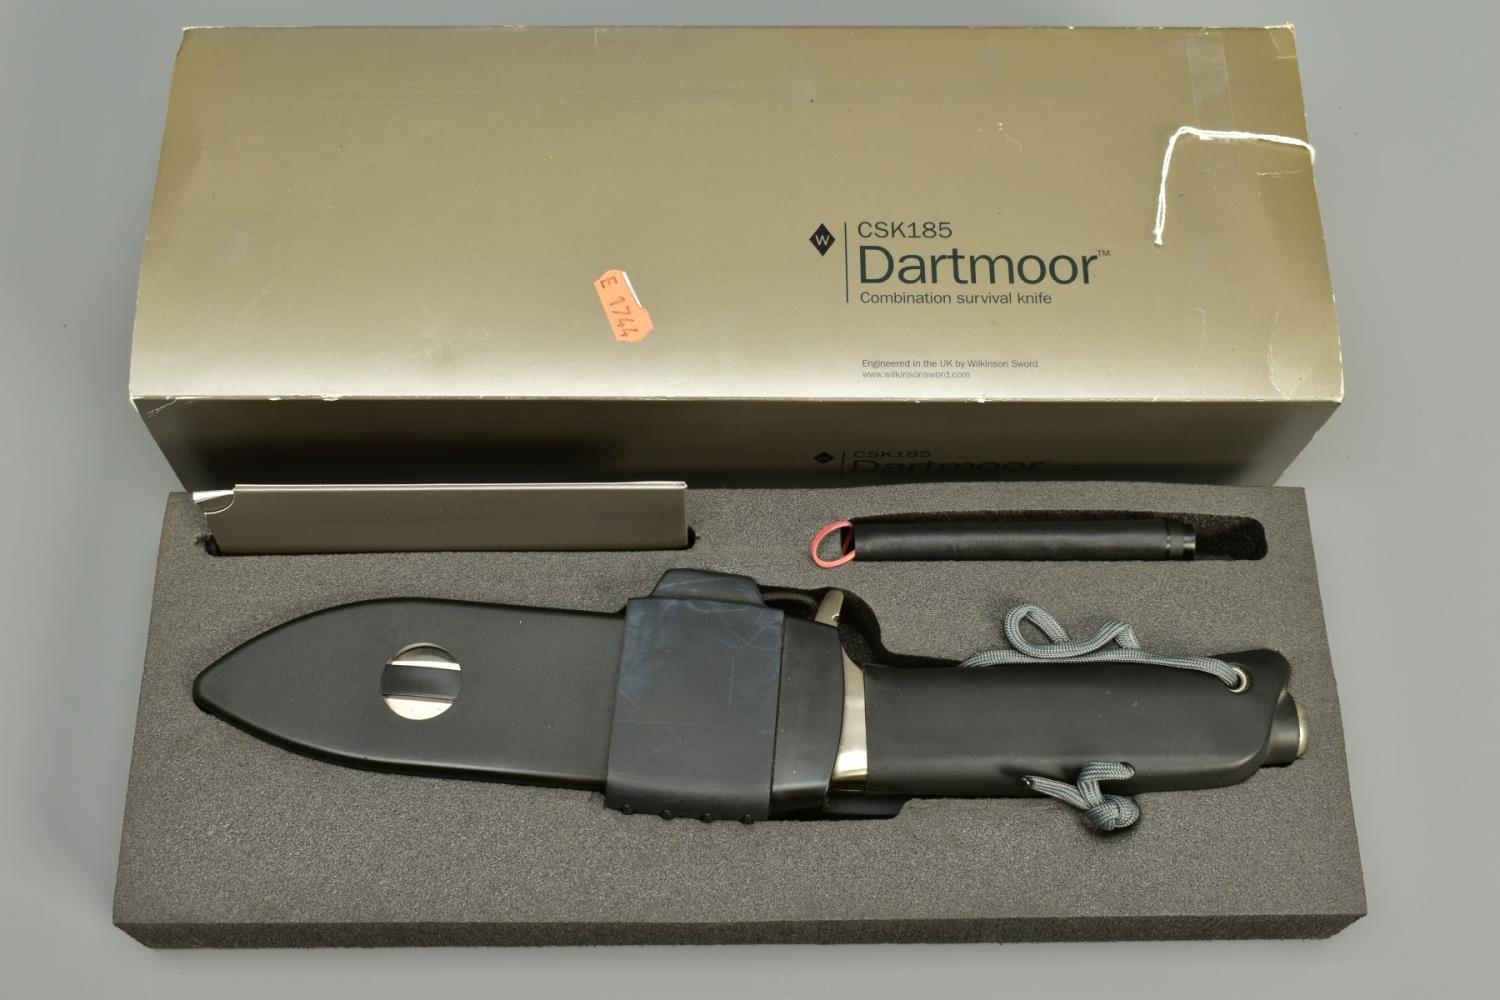 An 80s Revival: Surviving with the Dartmoor Knife